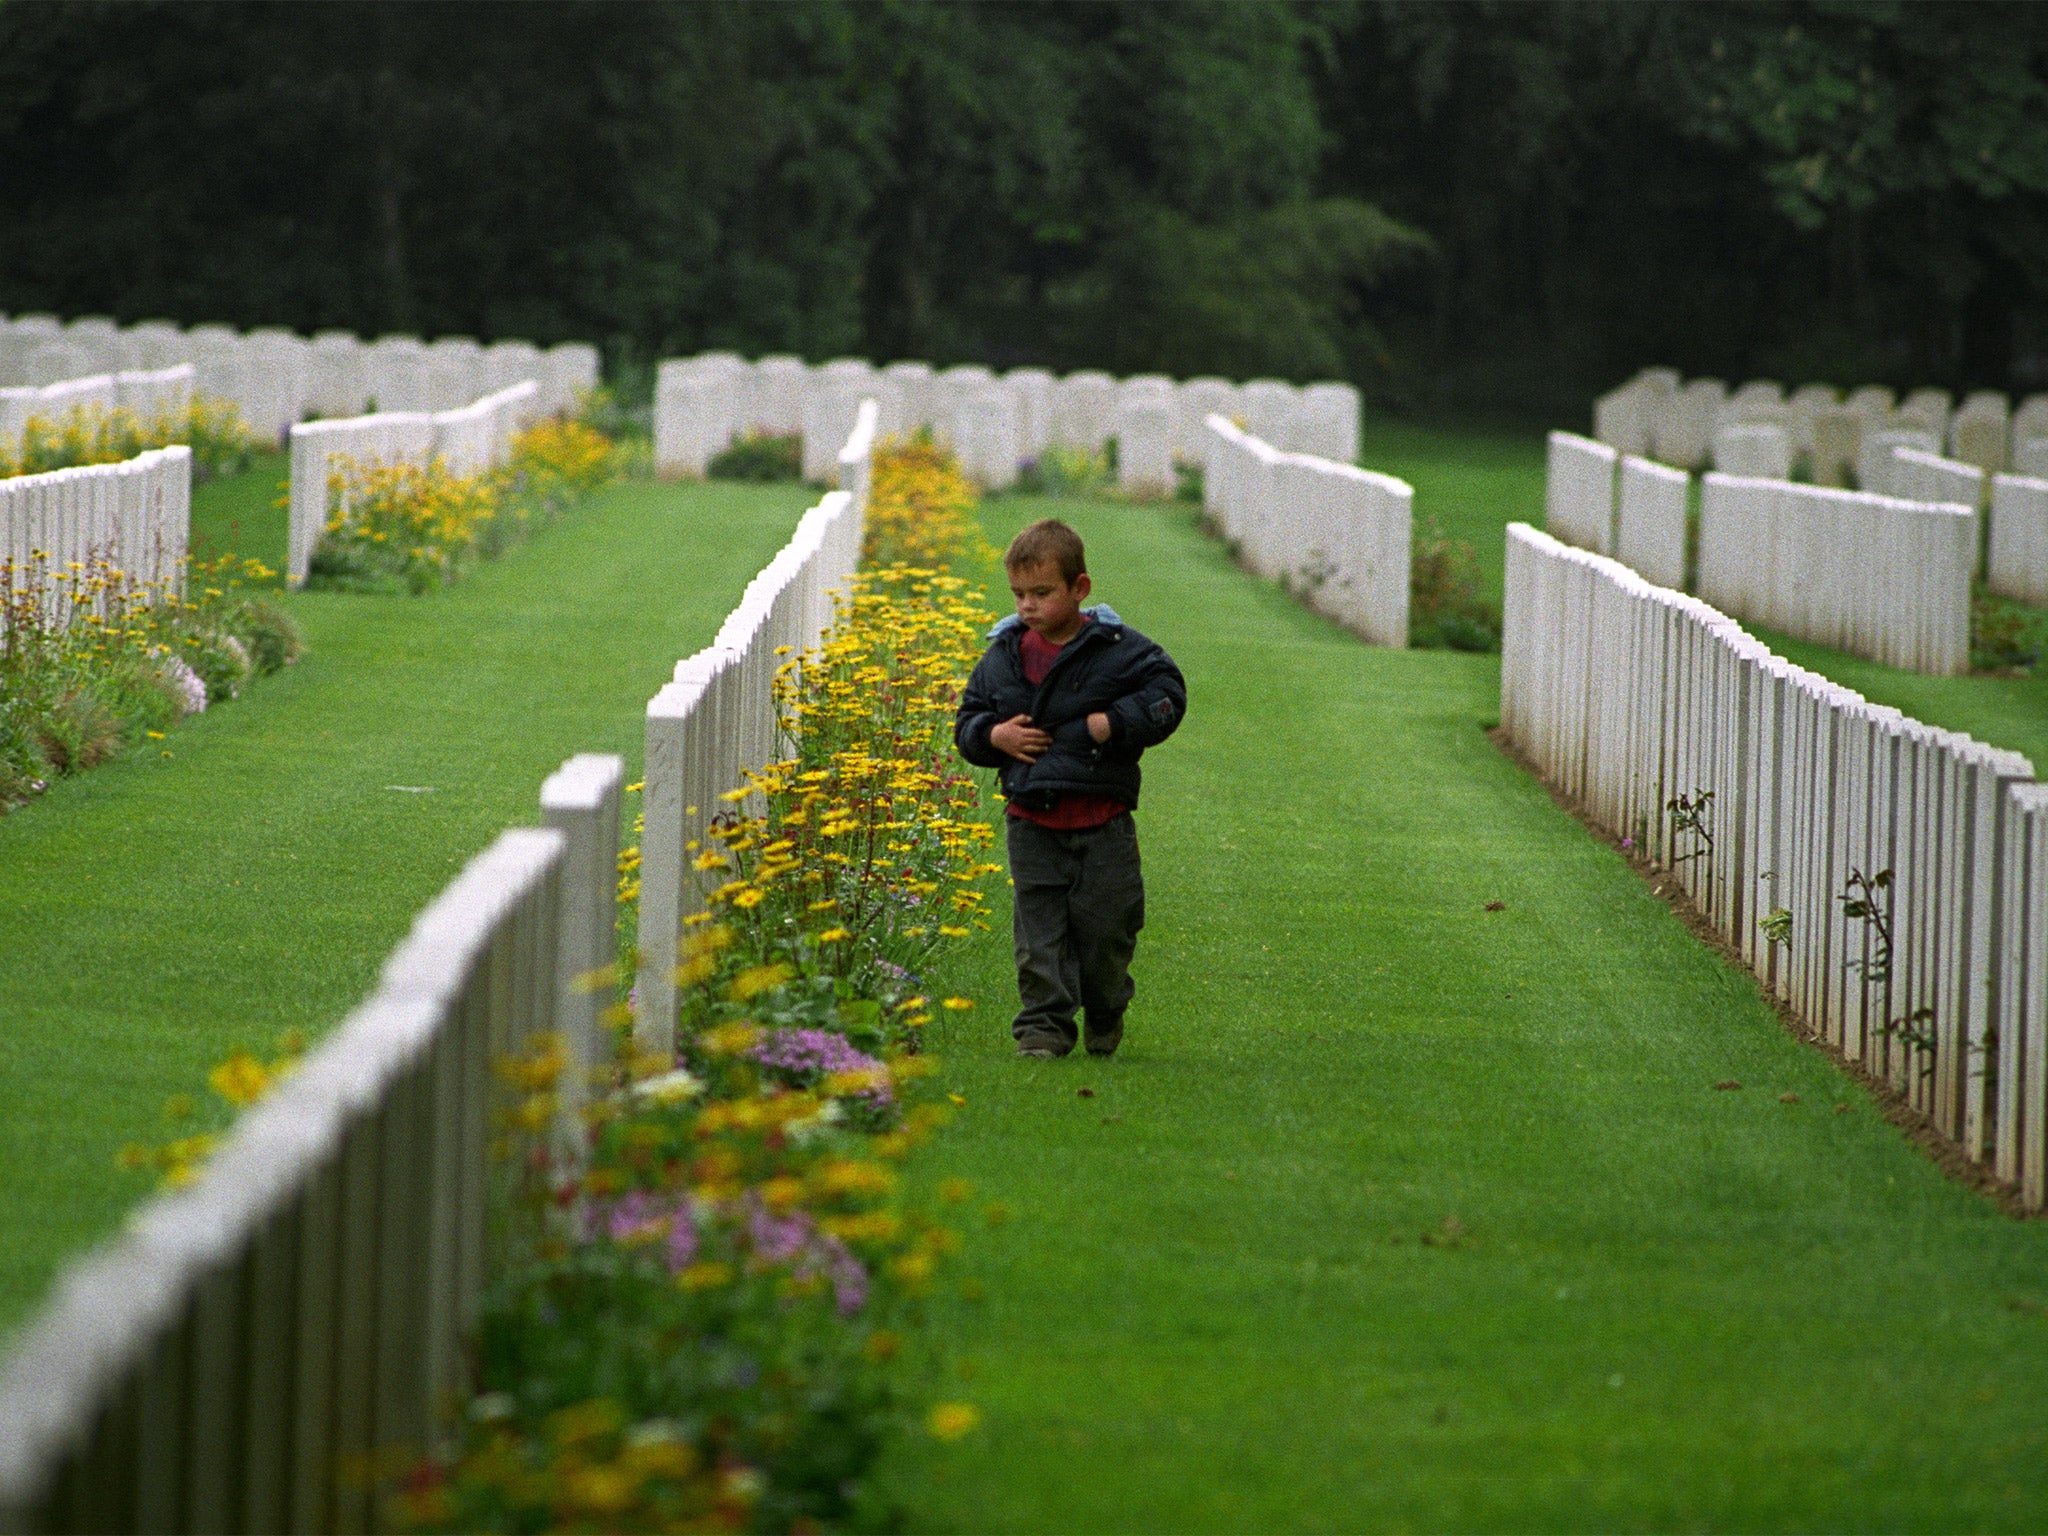 The Commonwealth War Graves Commission cemeteries in France and Belgium dedicated to First World War casualties number 2,400 and visitor numbers have never been higher